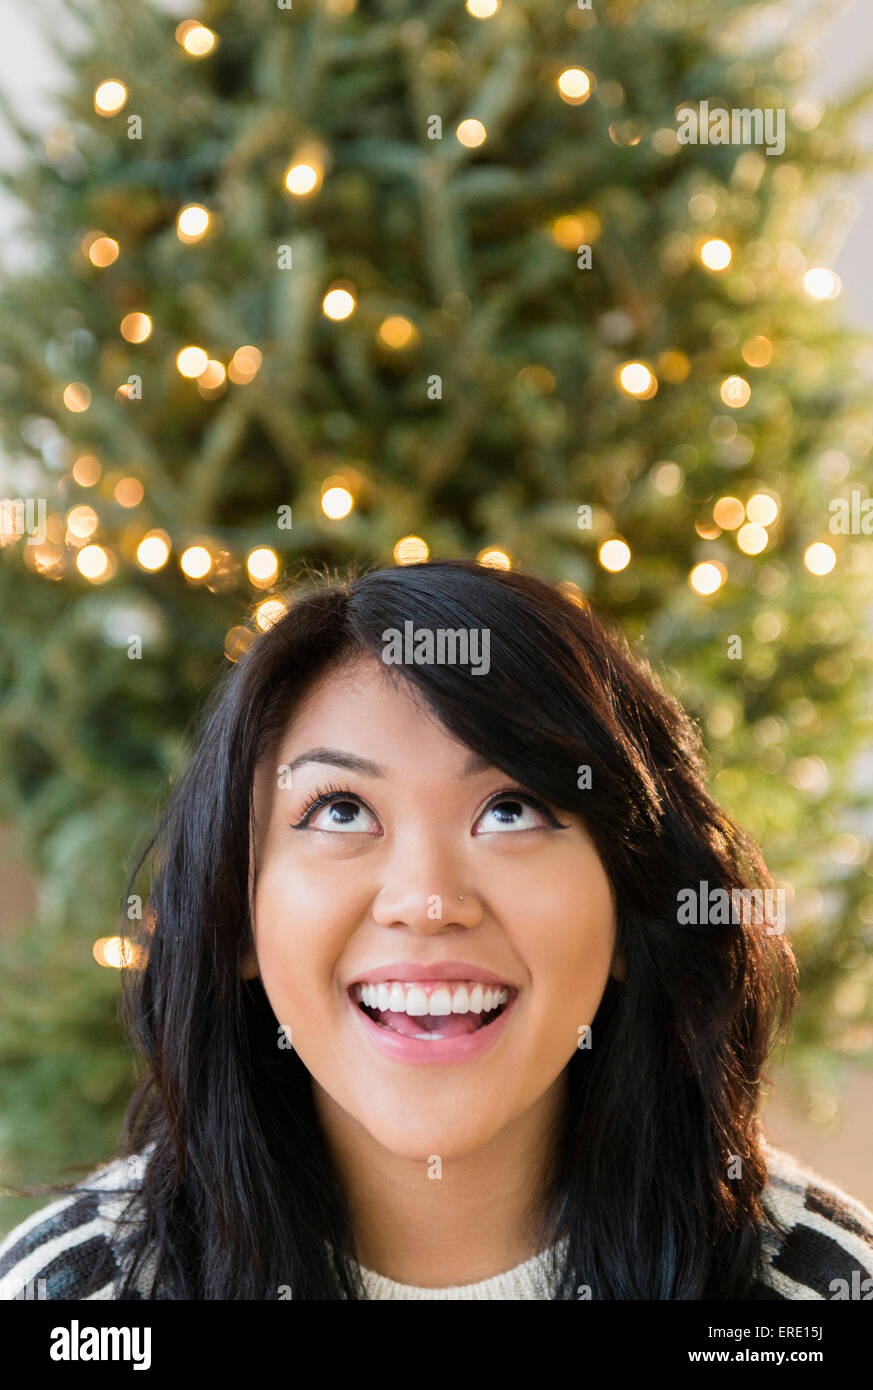 Pacific Islander woman looking up near Christmas Tree Banque D'Images